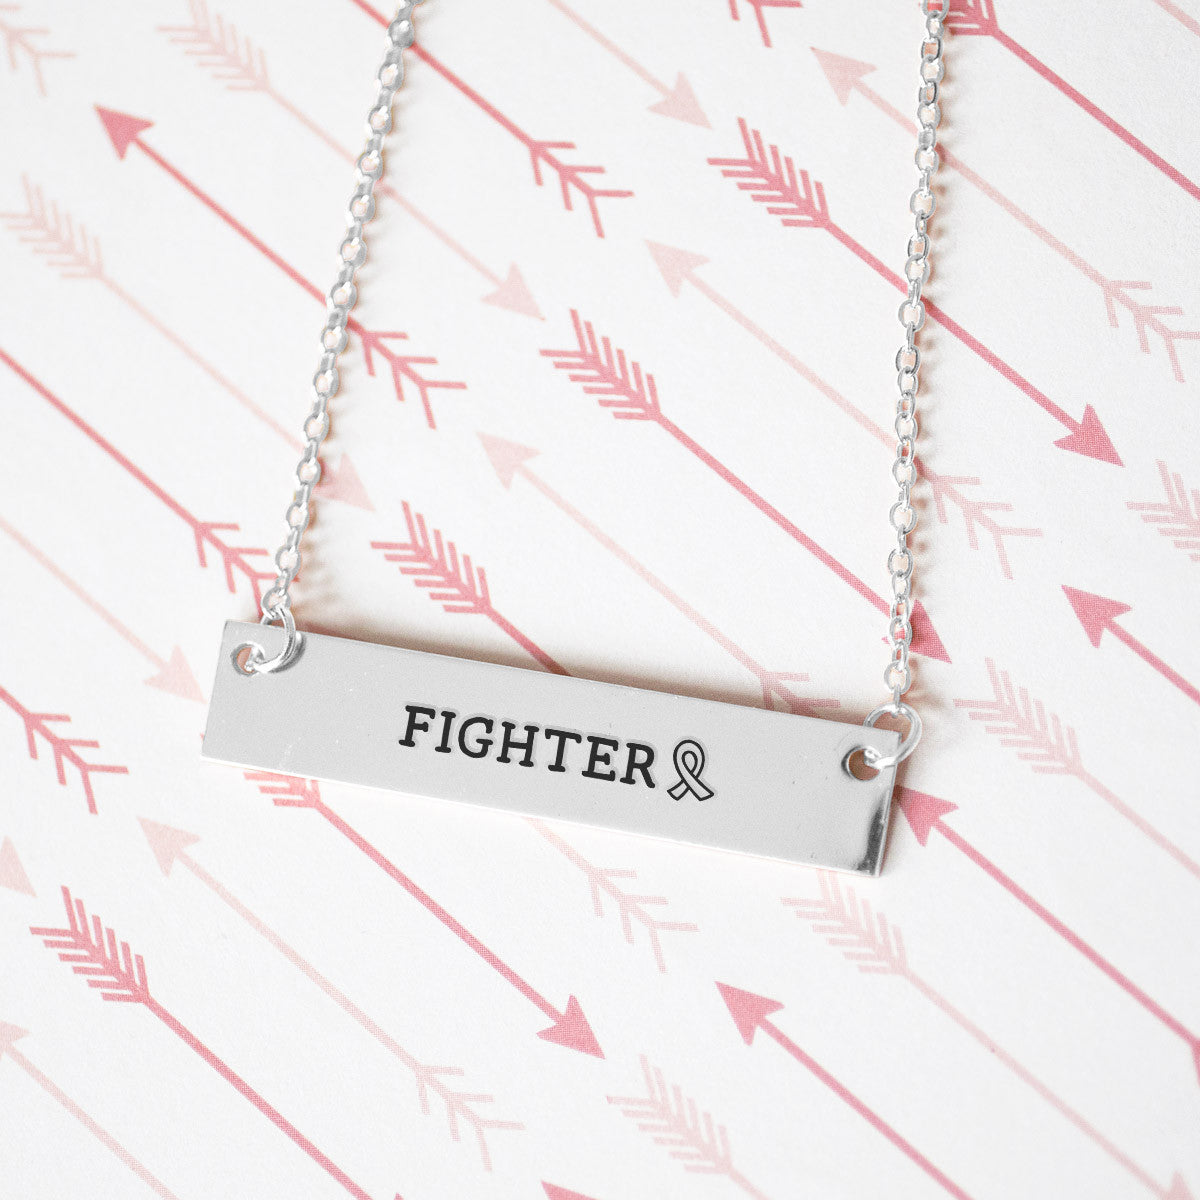 Fighter Gold / Silver Bar Necklace - pipercleo.com